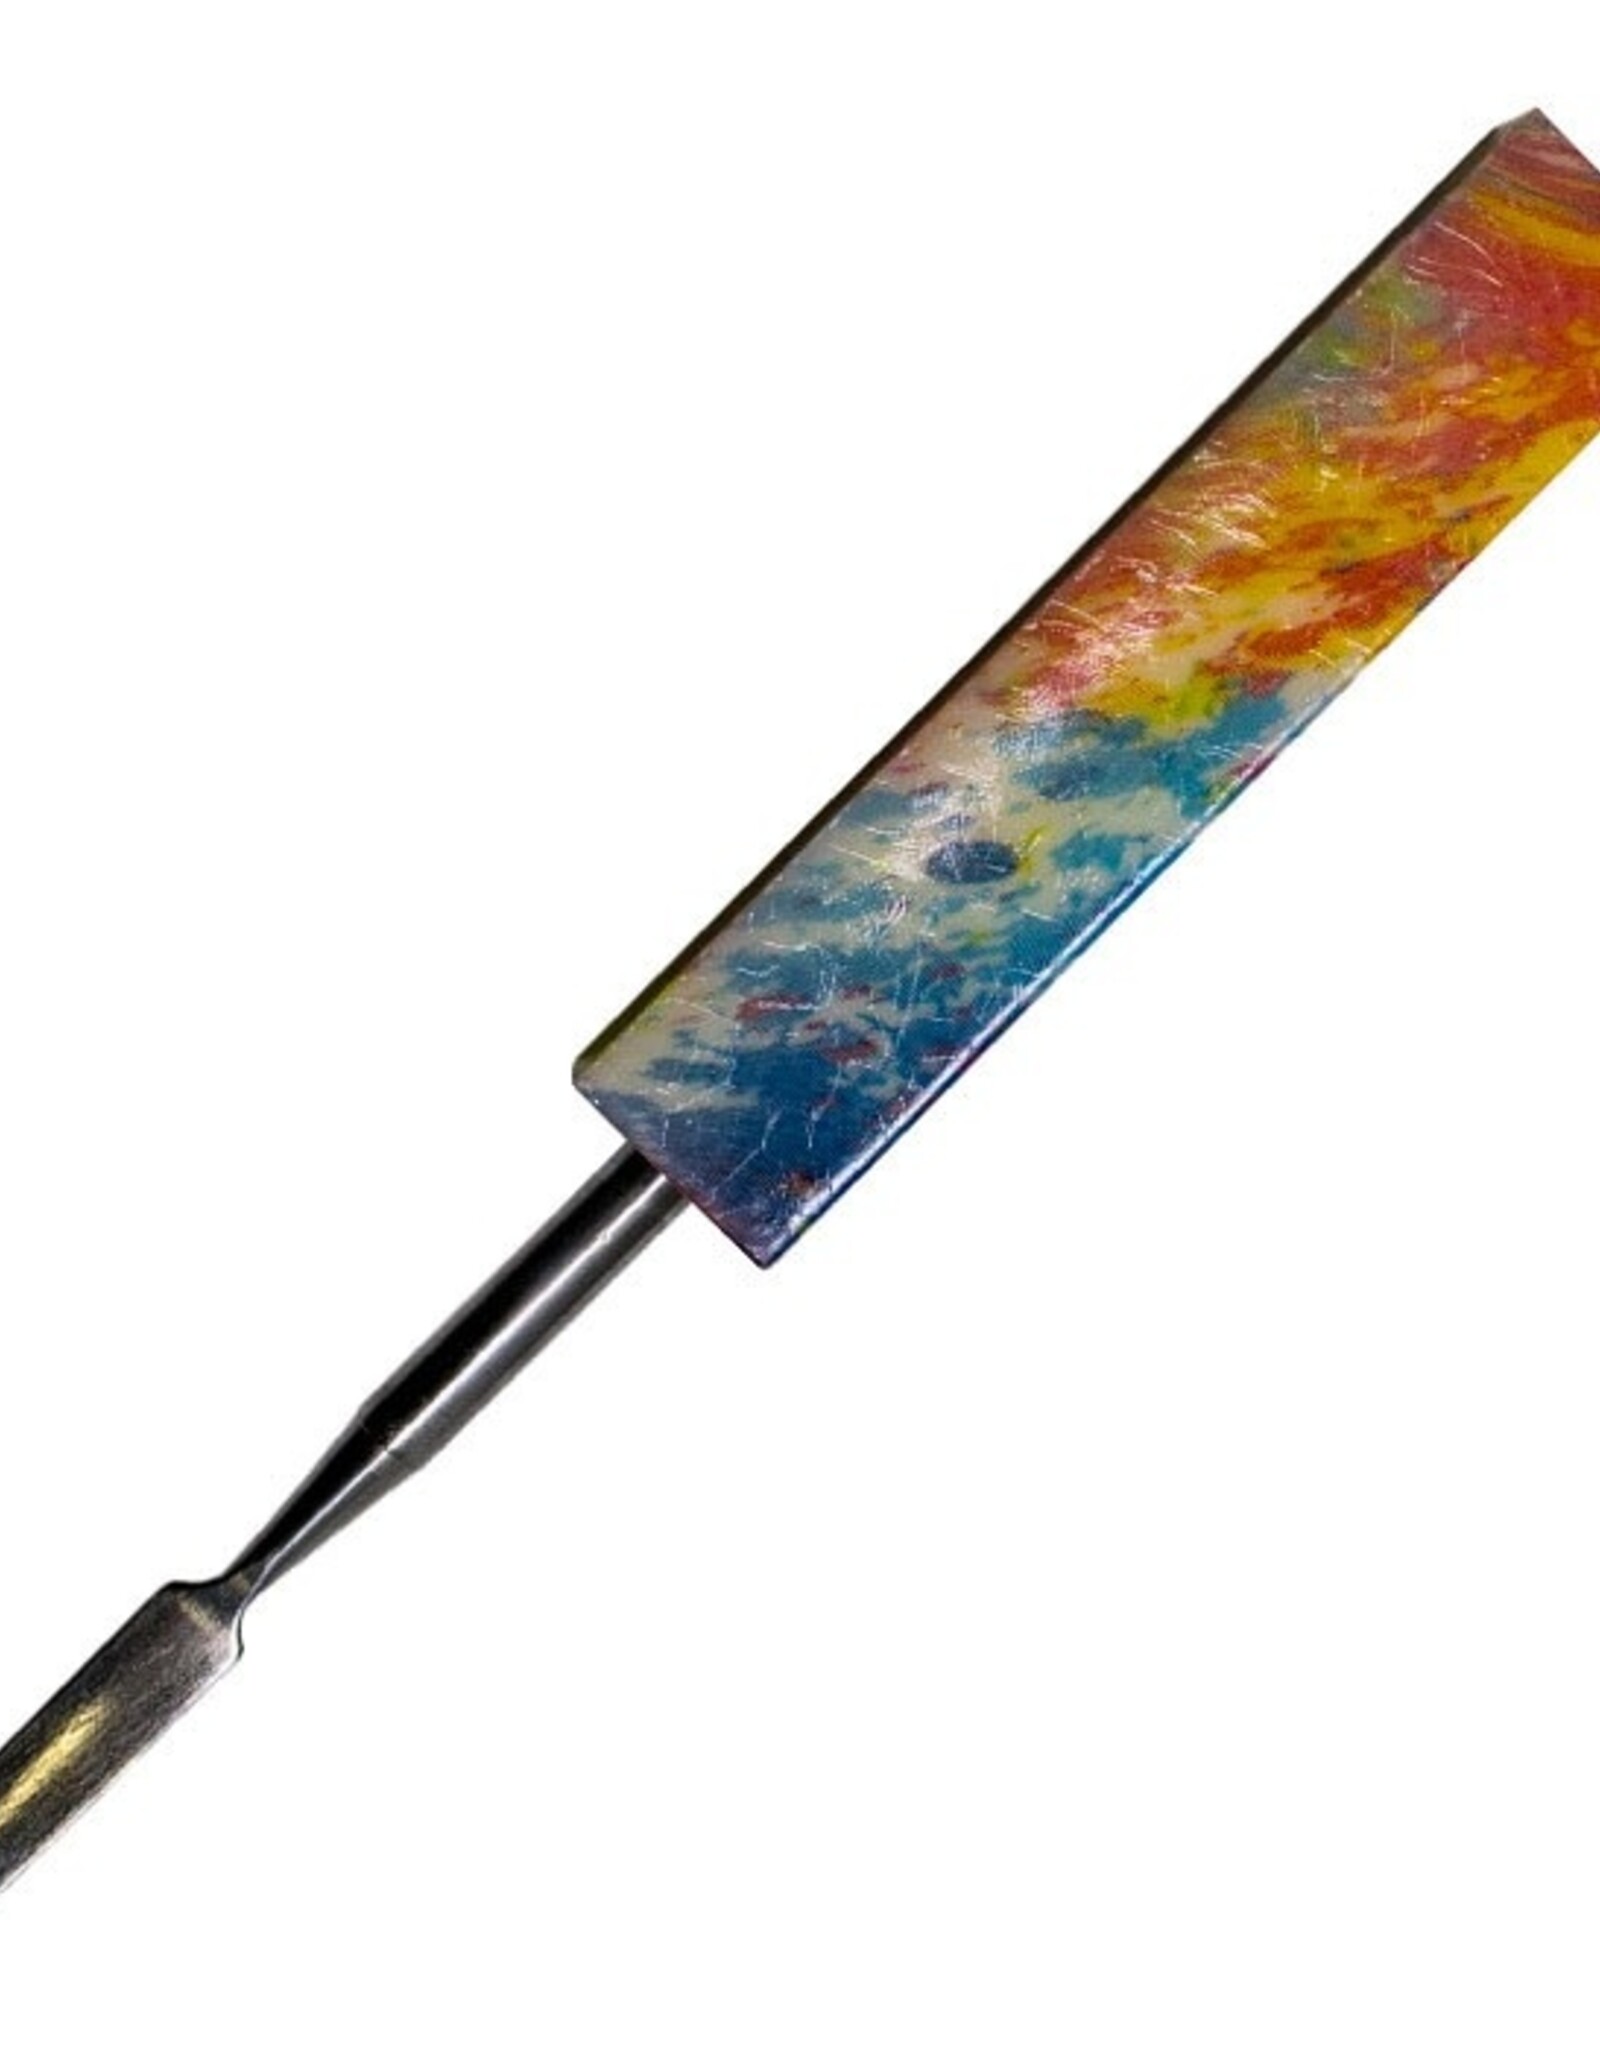 Dotted Rainbow Dabber w/ Paddle Scooper